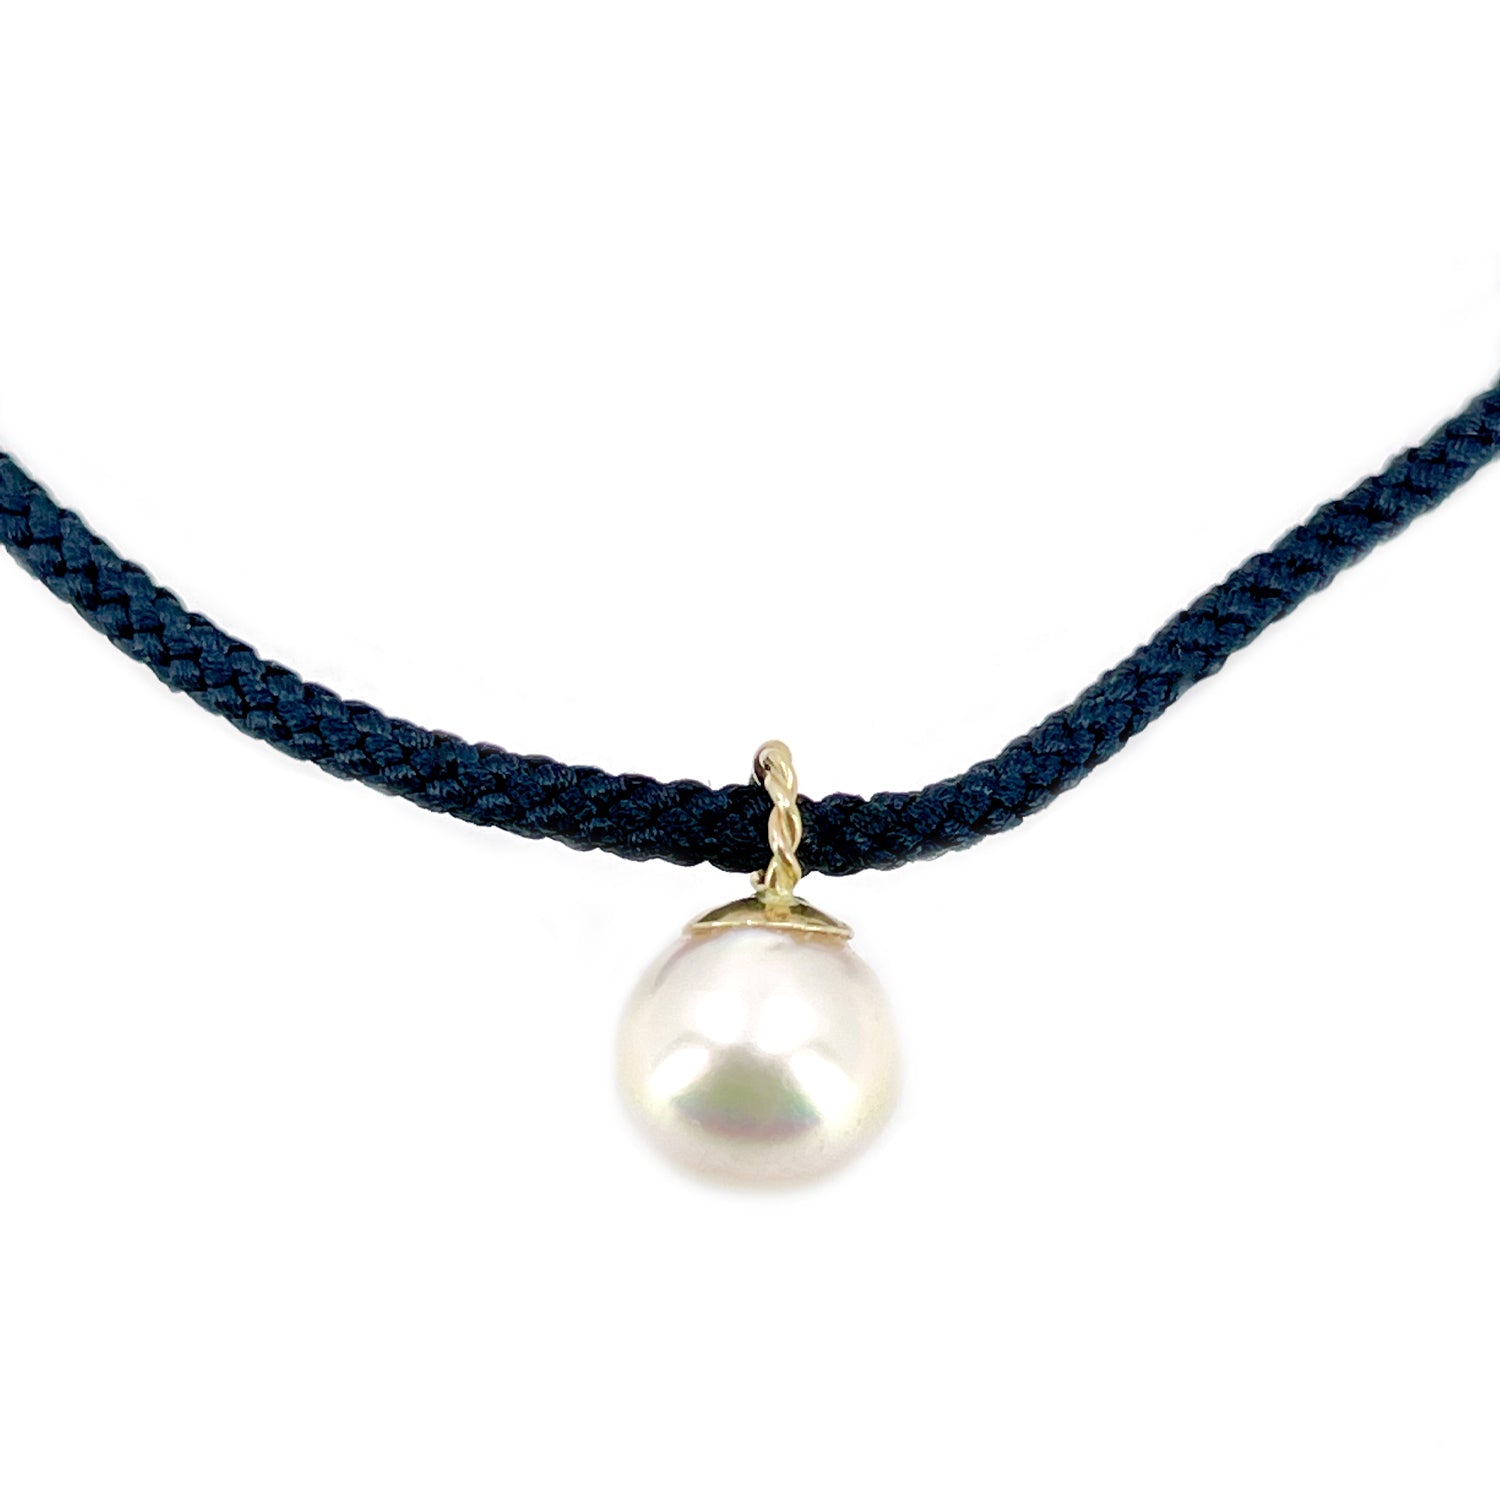 Kumihimo Braided Black Silk Vintage Akoya Saltwater Cultured Pearl Necklace-14K Yellow Gold